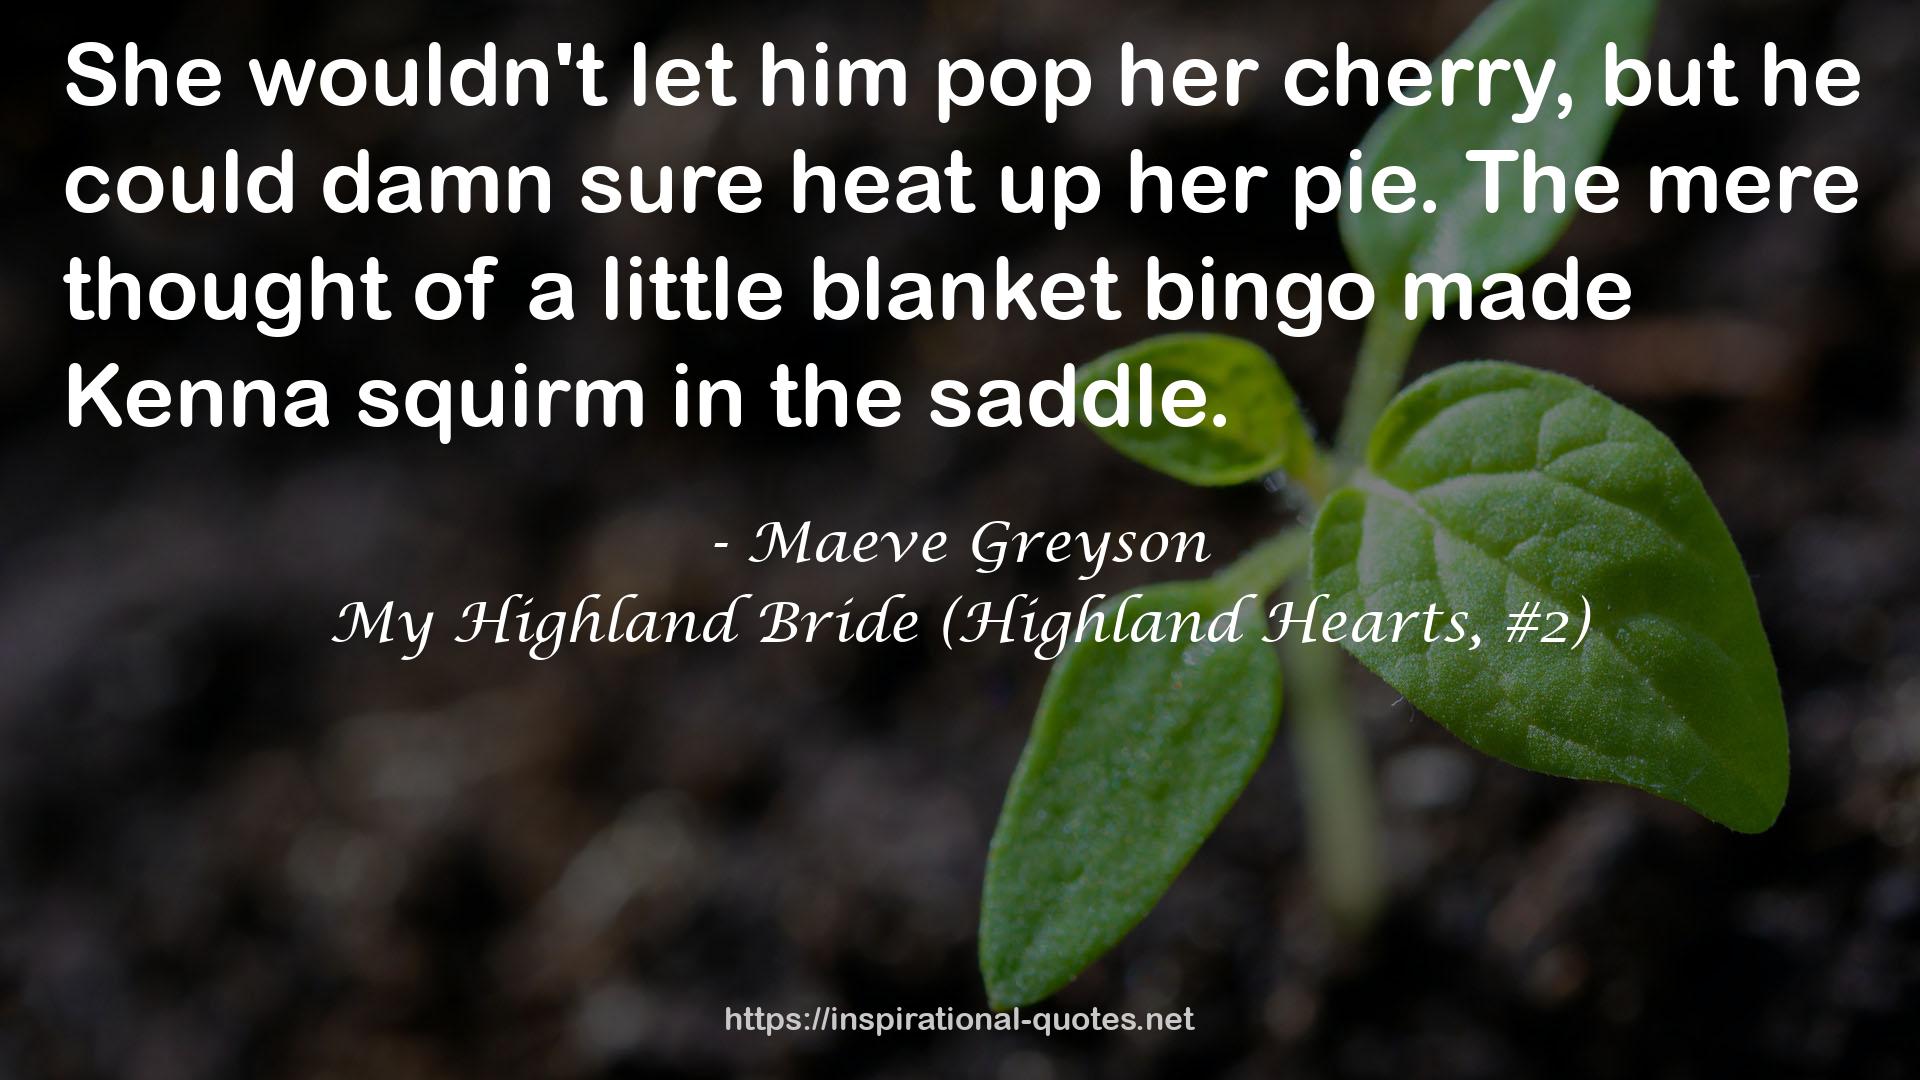 My Highland Bride (Highland Hearts, #2) QUOTES